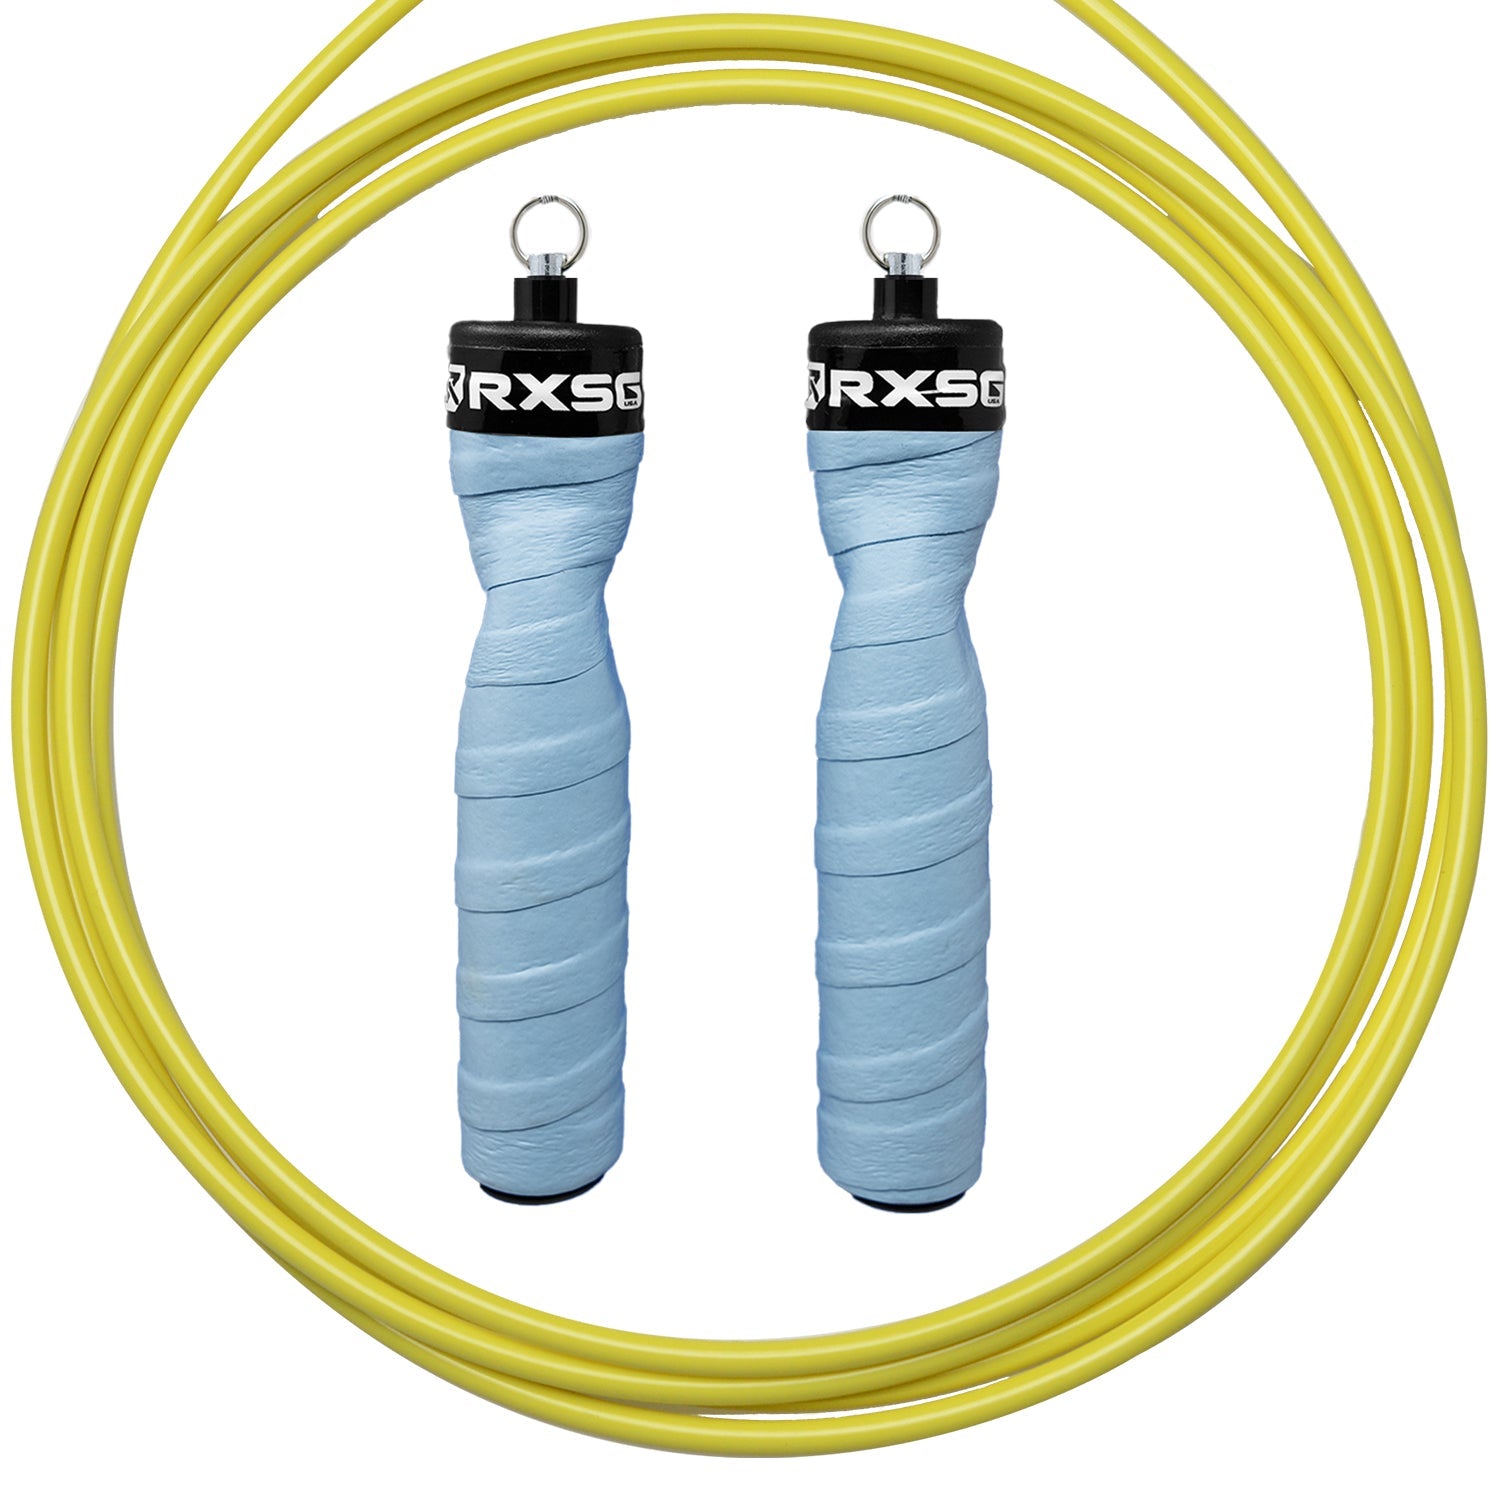 CustomFit Skye Jump Rope with yellowcable